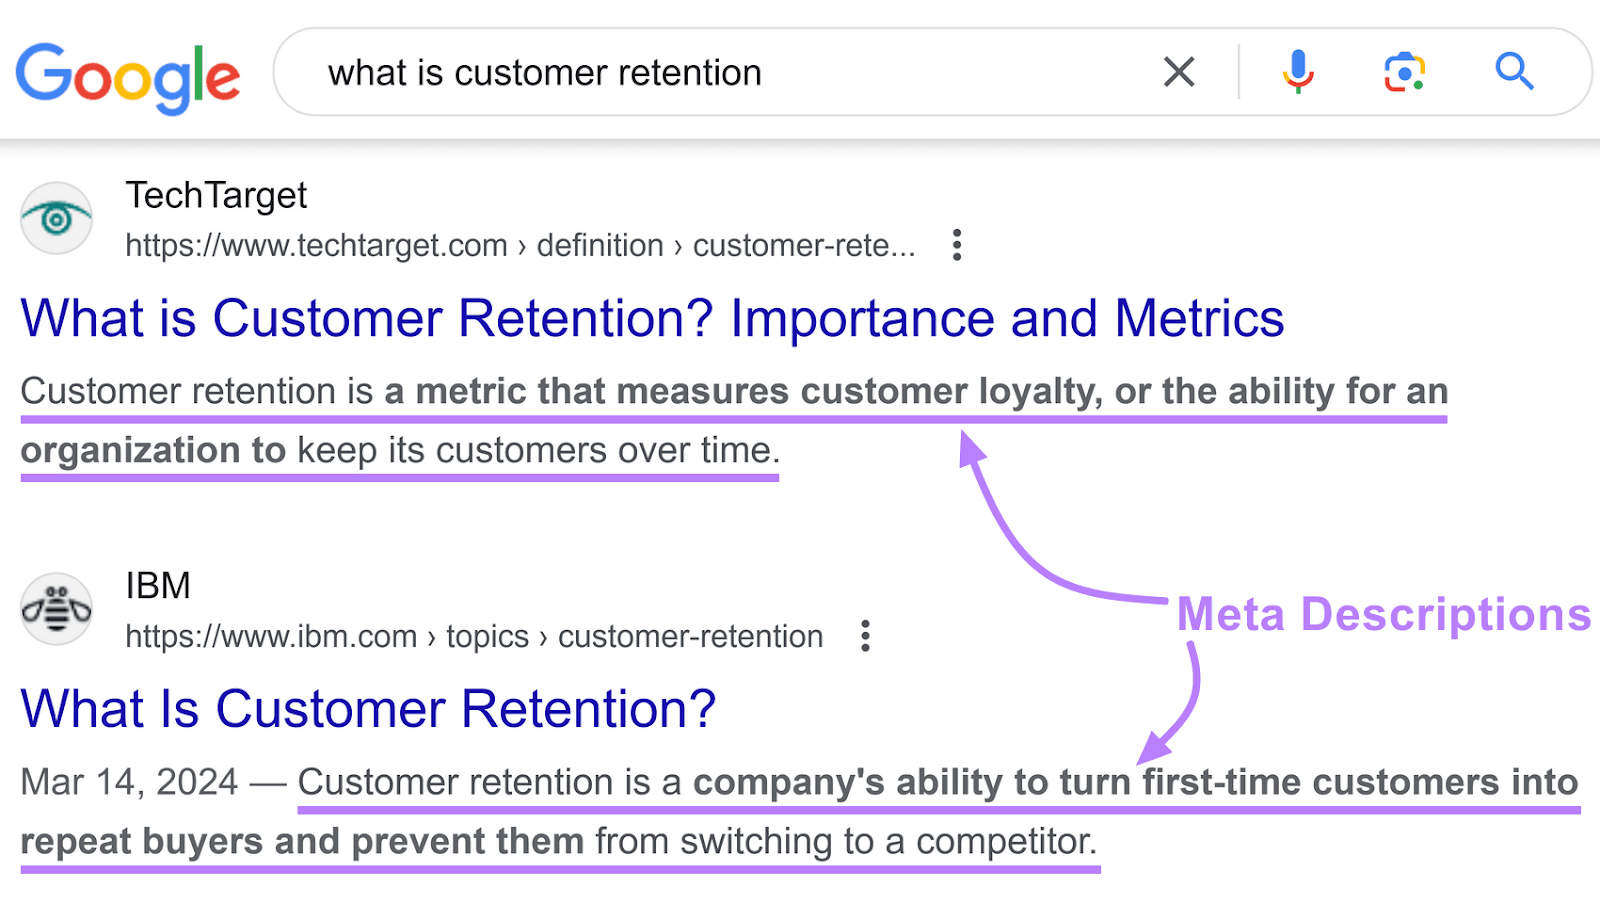 Google search results for "what is customer retention" with drawn arrows pointing to the meta descriptions.